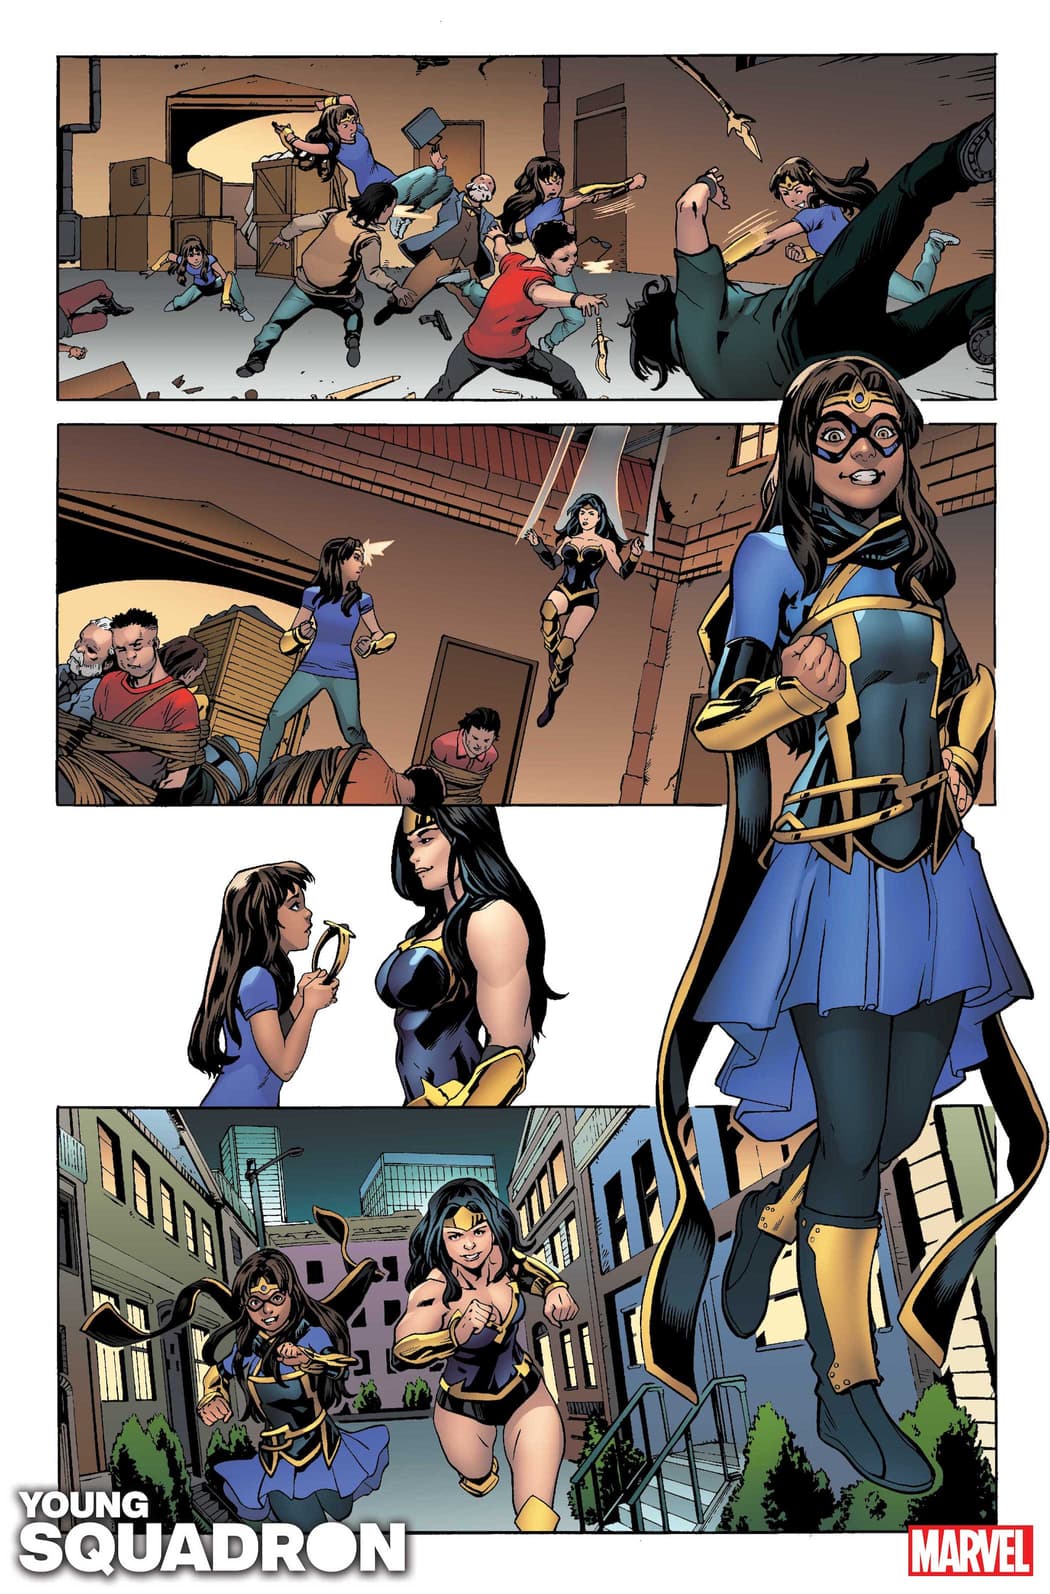 HEROES REBORN: YOUNG SQUADRON #1 preview art by Steven Cummings with colors by Erick Arciniega